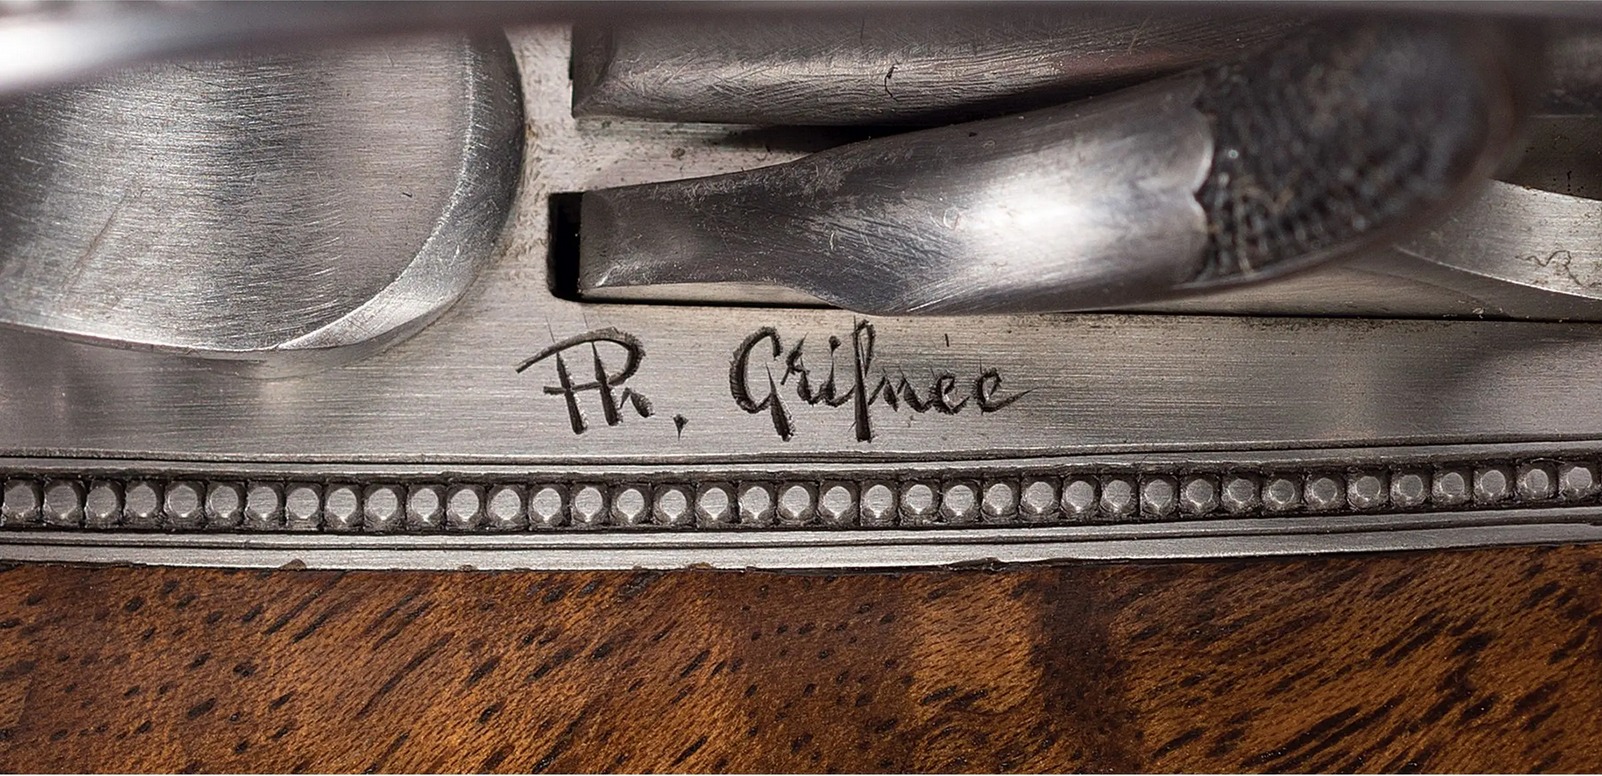 Holland and Holland Phillippe Grifnee engraved double rifle